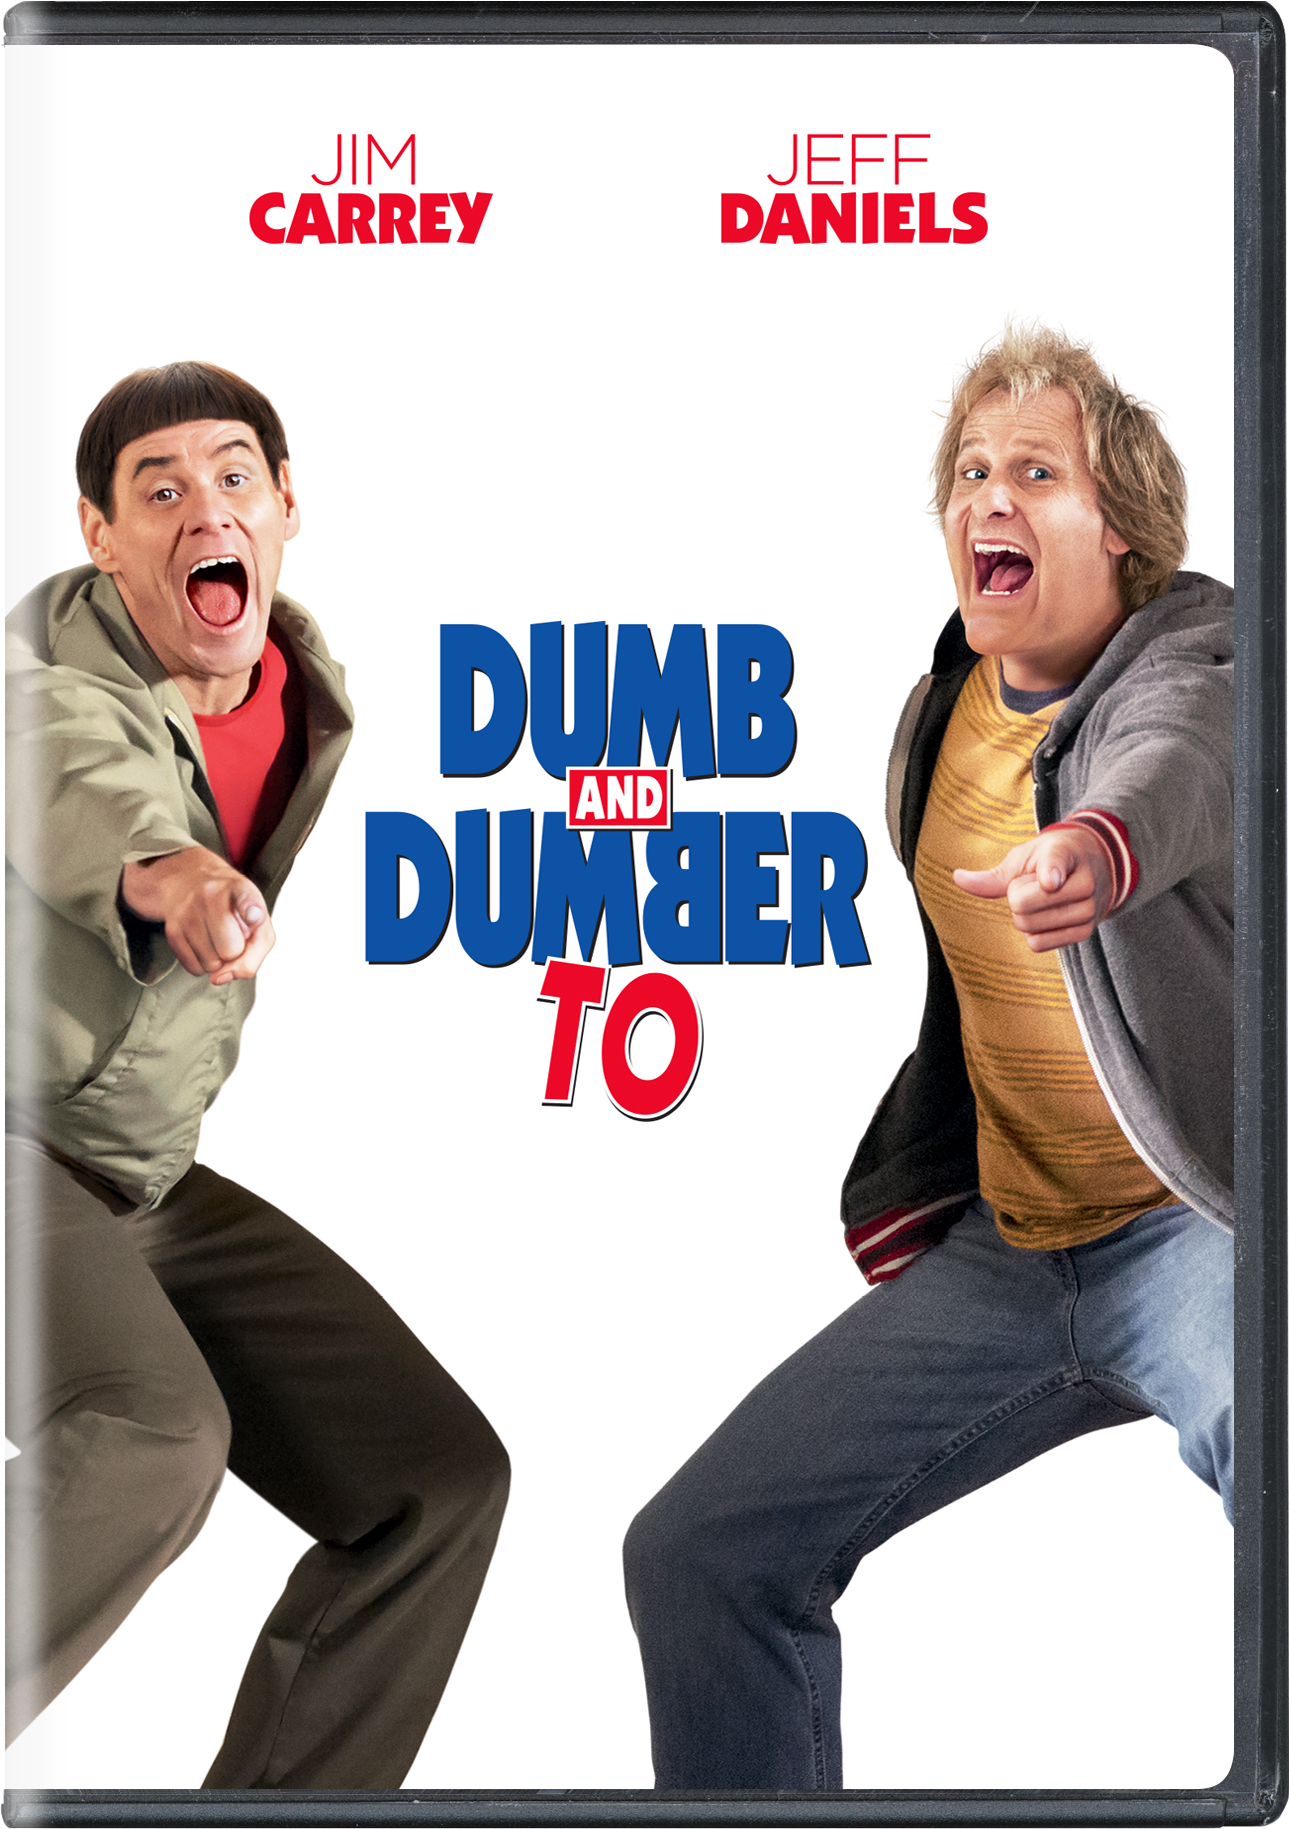 Dumb And Dumber To - DVD [ 2014 ]  - Comedy Movies On DVD - Movies On GRUV